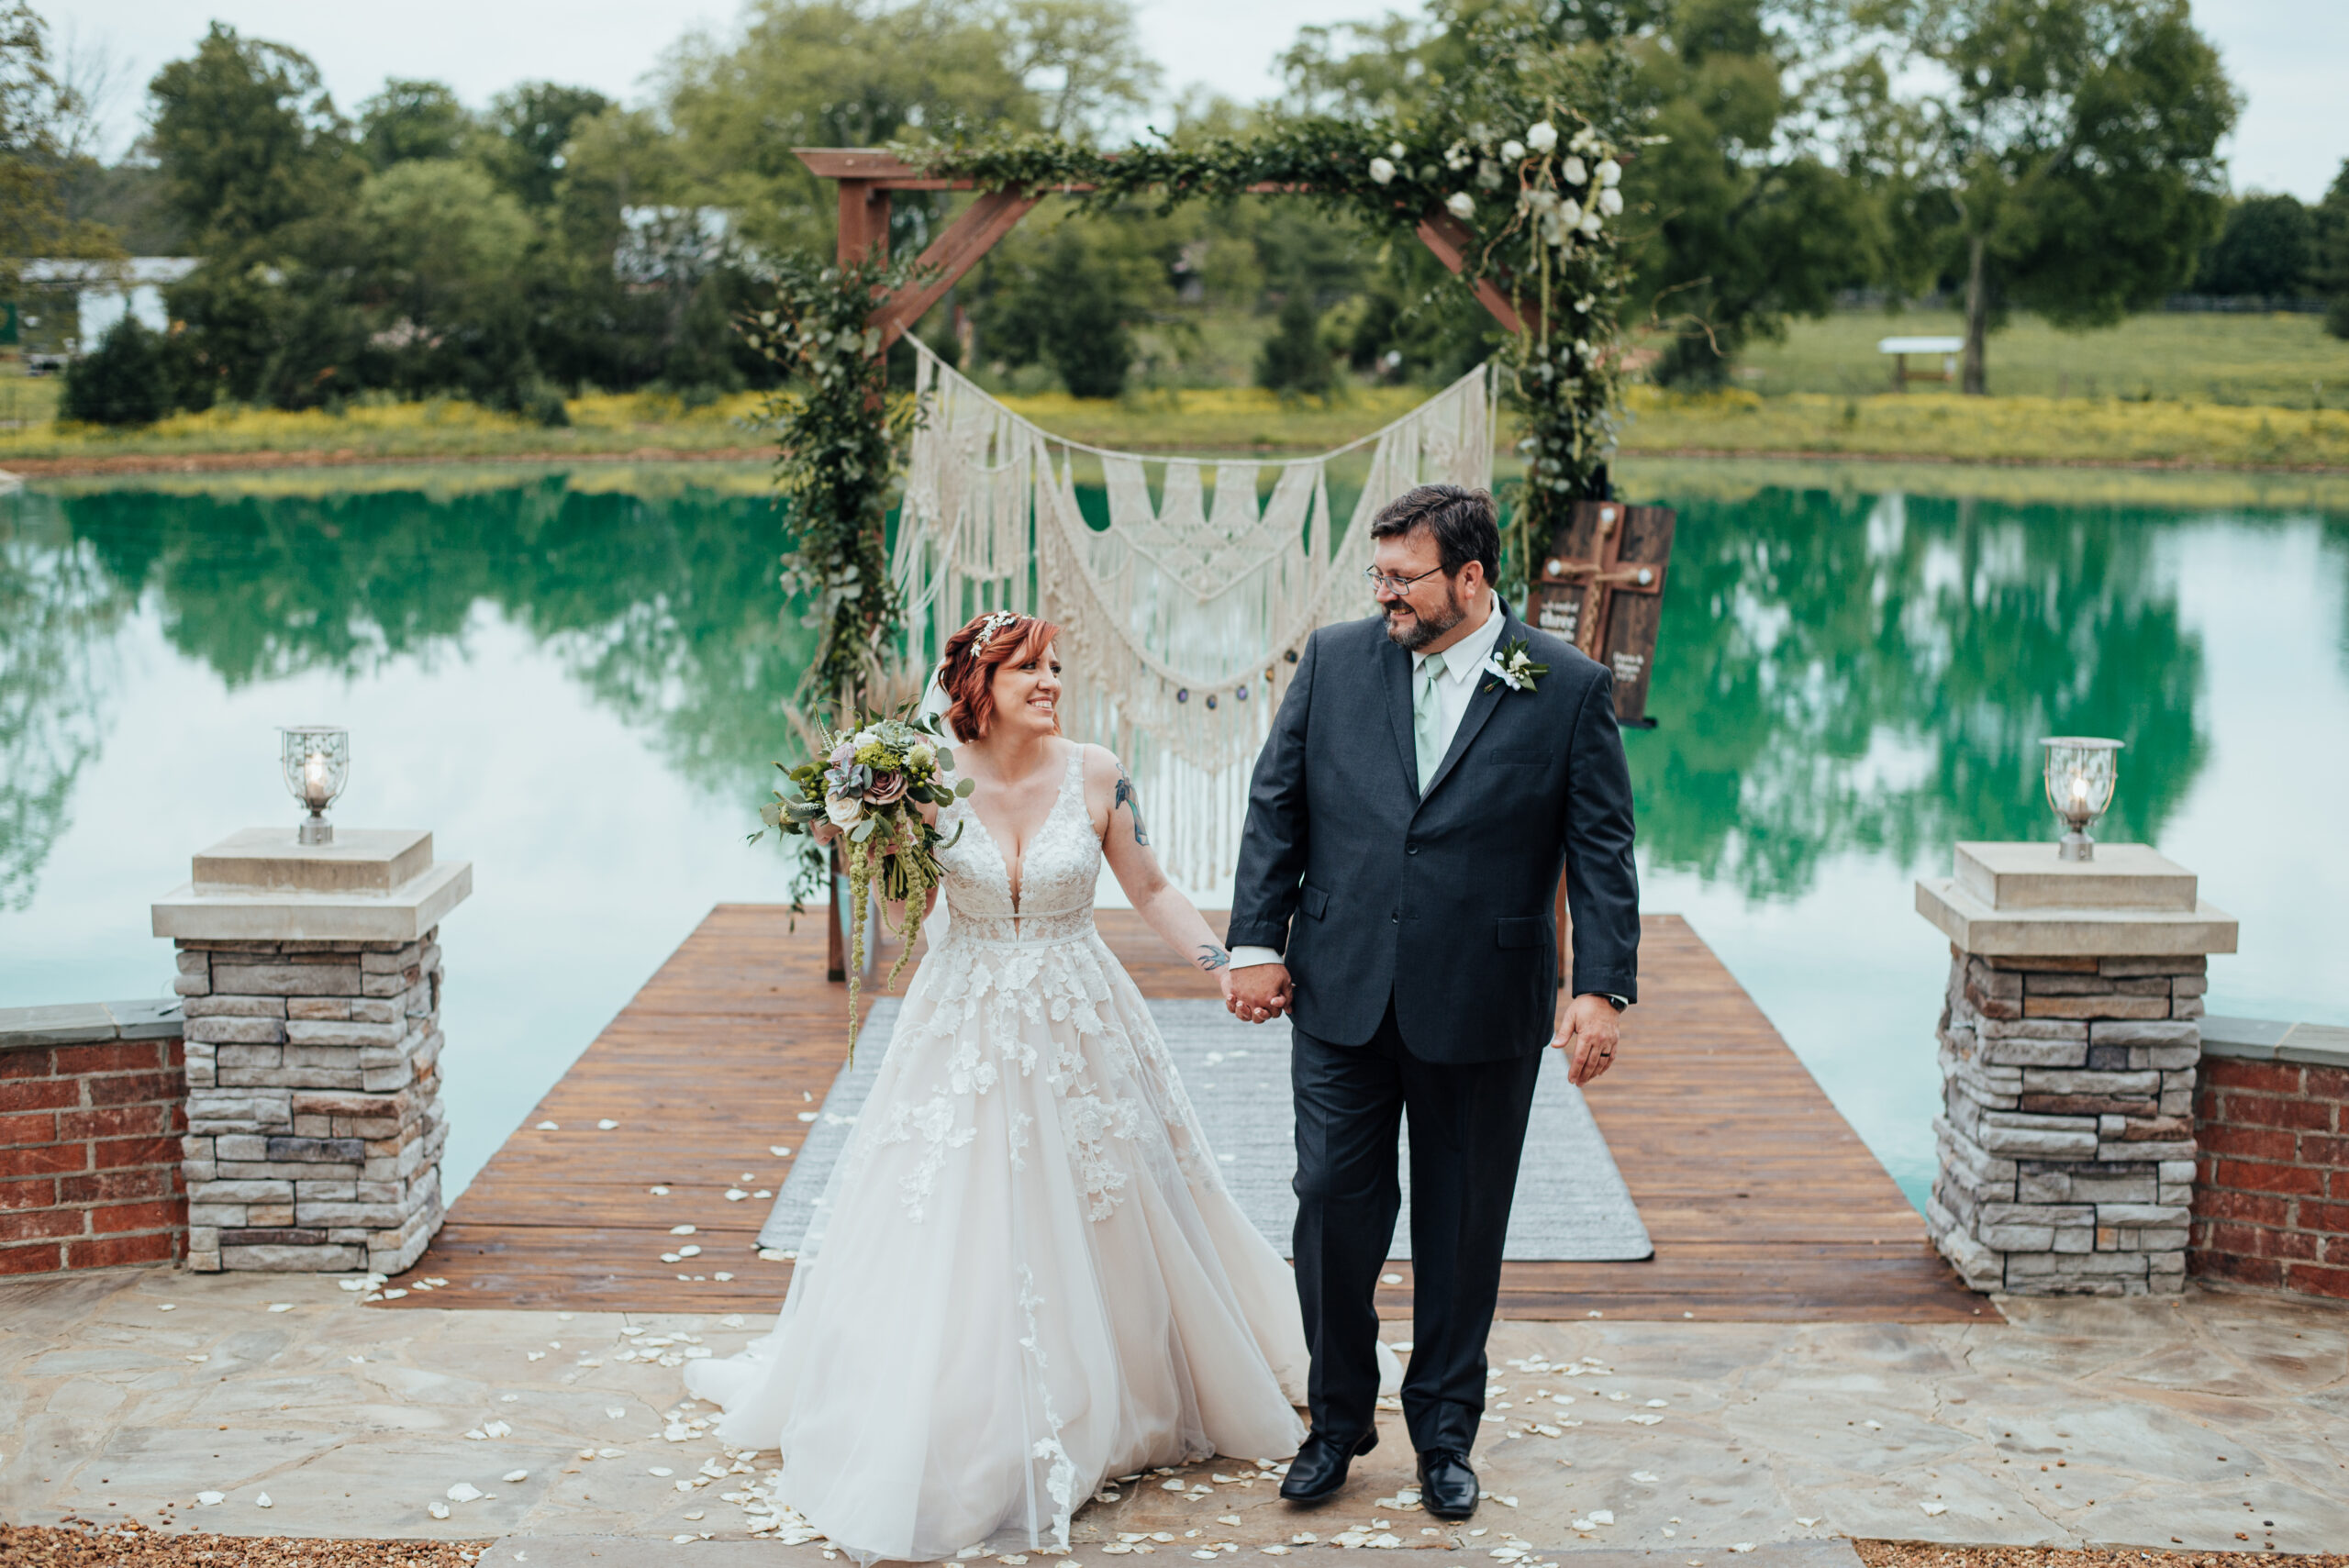 Bride wearing a flowing wedding dress with lace accents and a plunging neckline holds hands with the groom who is wearing a navy suit and light green tie. They are walking away from the pier over the pond at Steel Magnolia Barn. their arbor is decorated with a large macreme piece, greenery and white flowers. There are stone pillars and low brick walls on either side of them. 